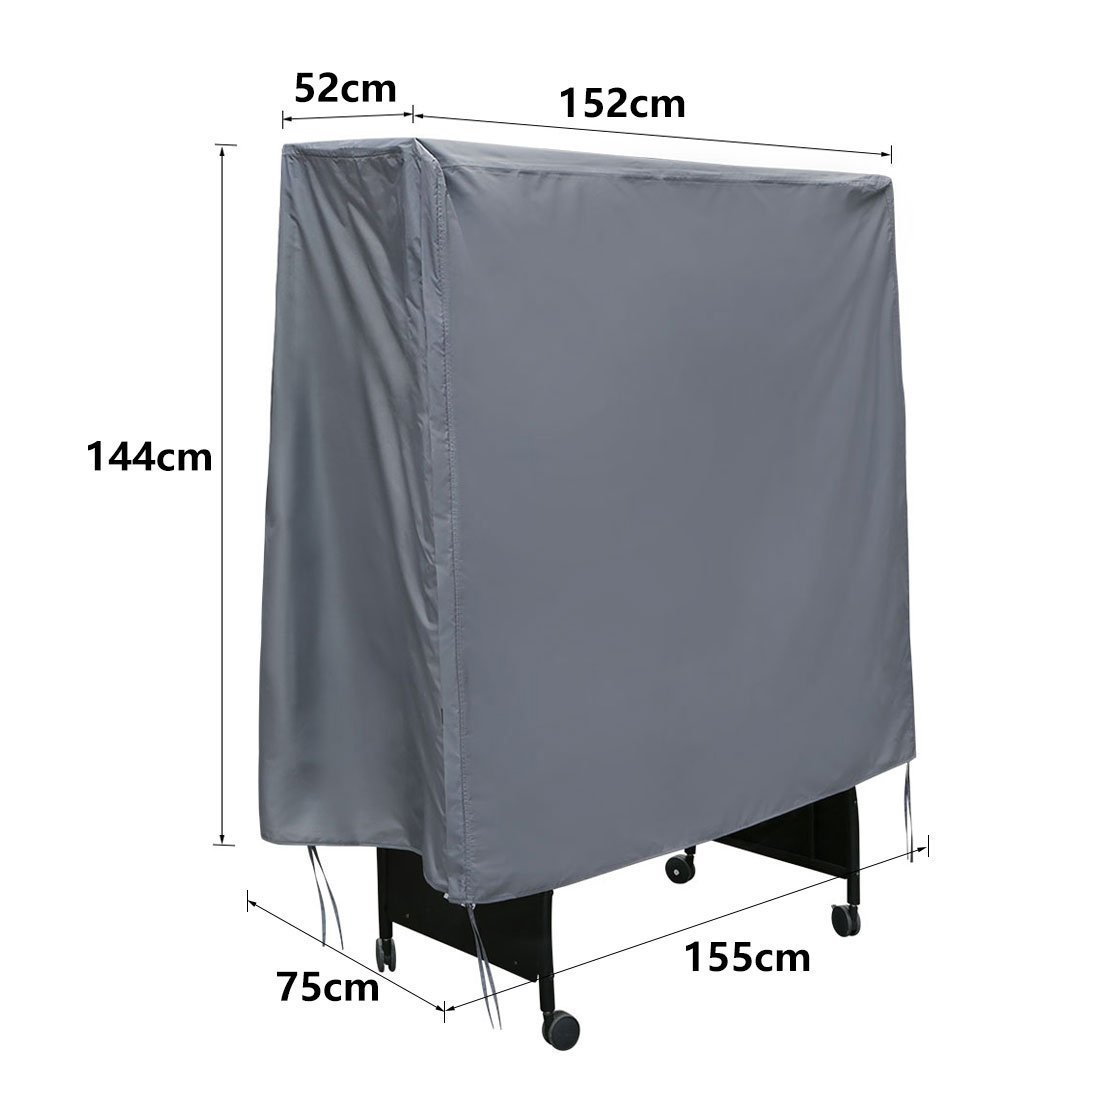 Table-Tennis-Table-Cover-Waterproof-Dustproof-Folding-Protective-Case-1347336